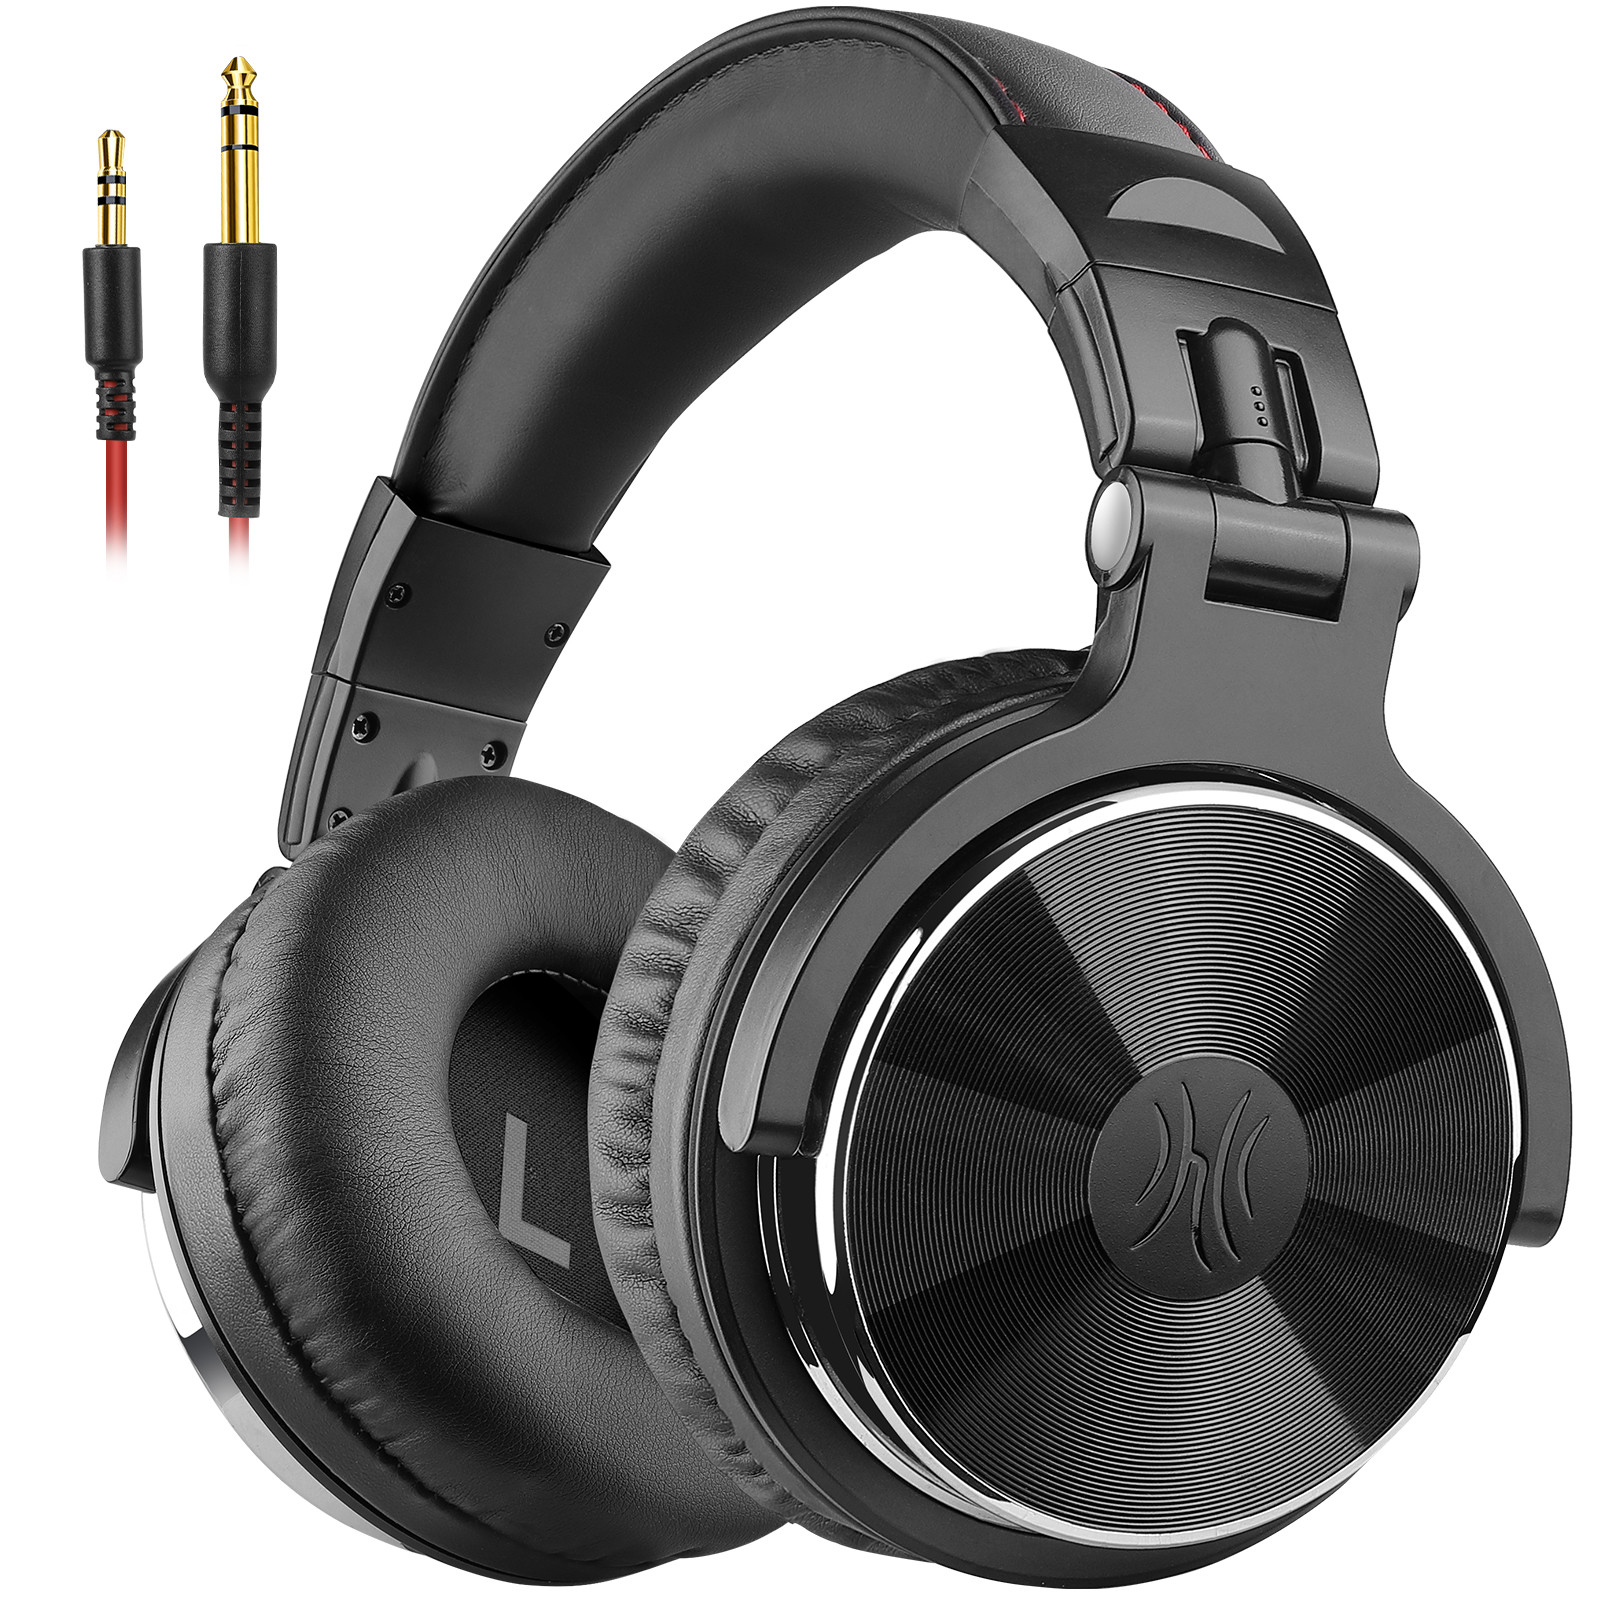 Over-ear ONEODIO 10, Headsets Schwarz Pro